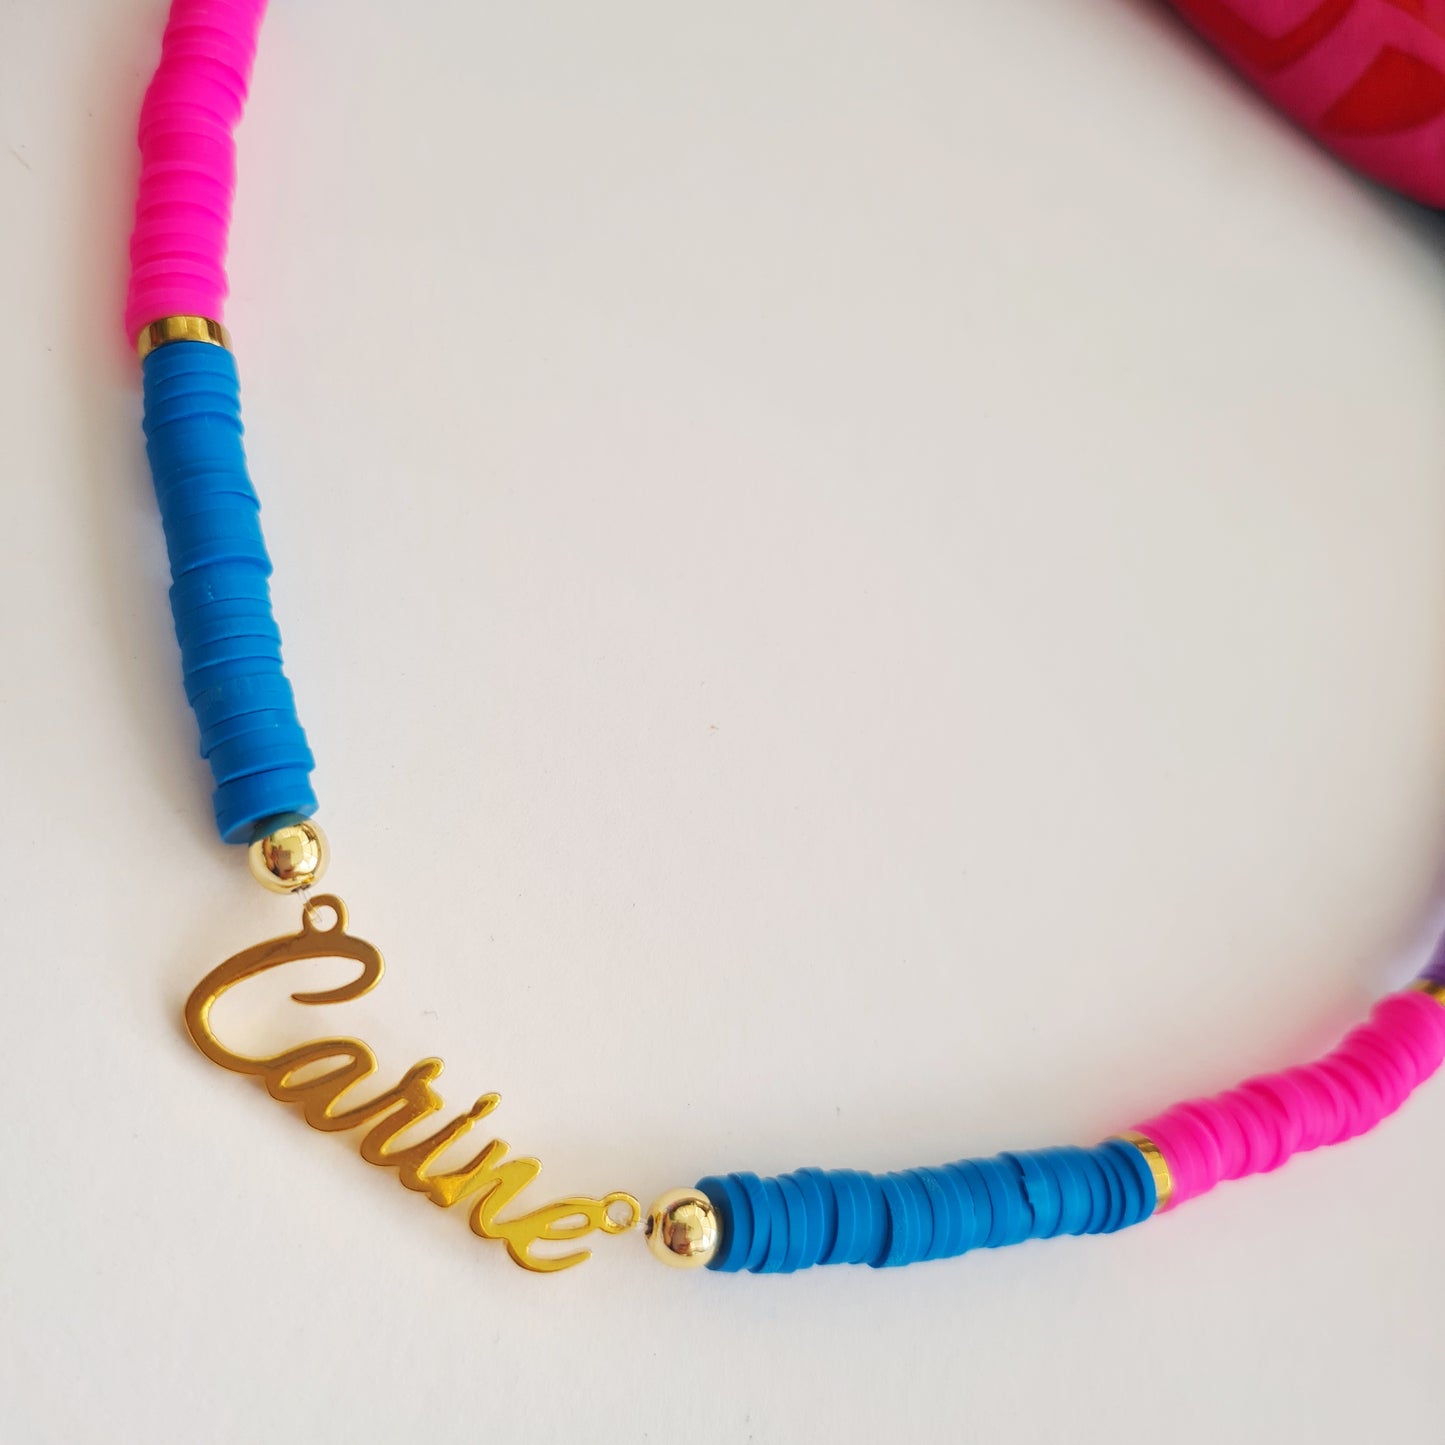 Written Name Necklace